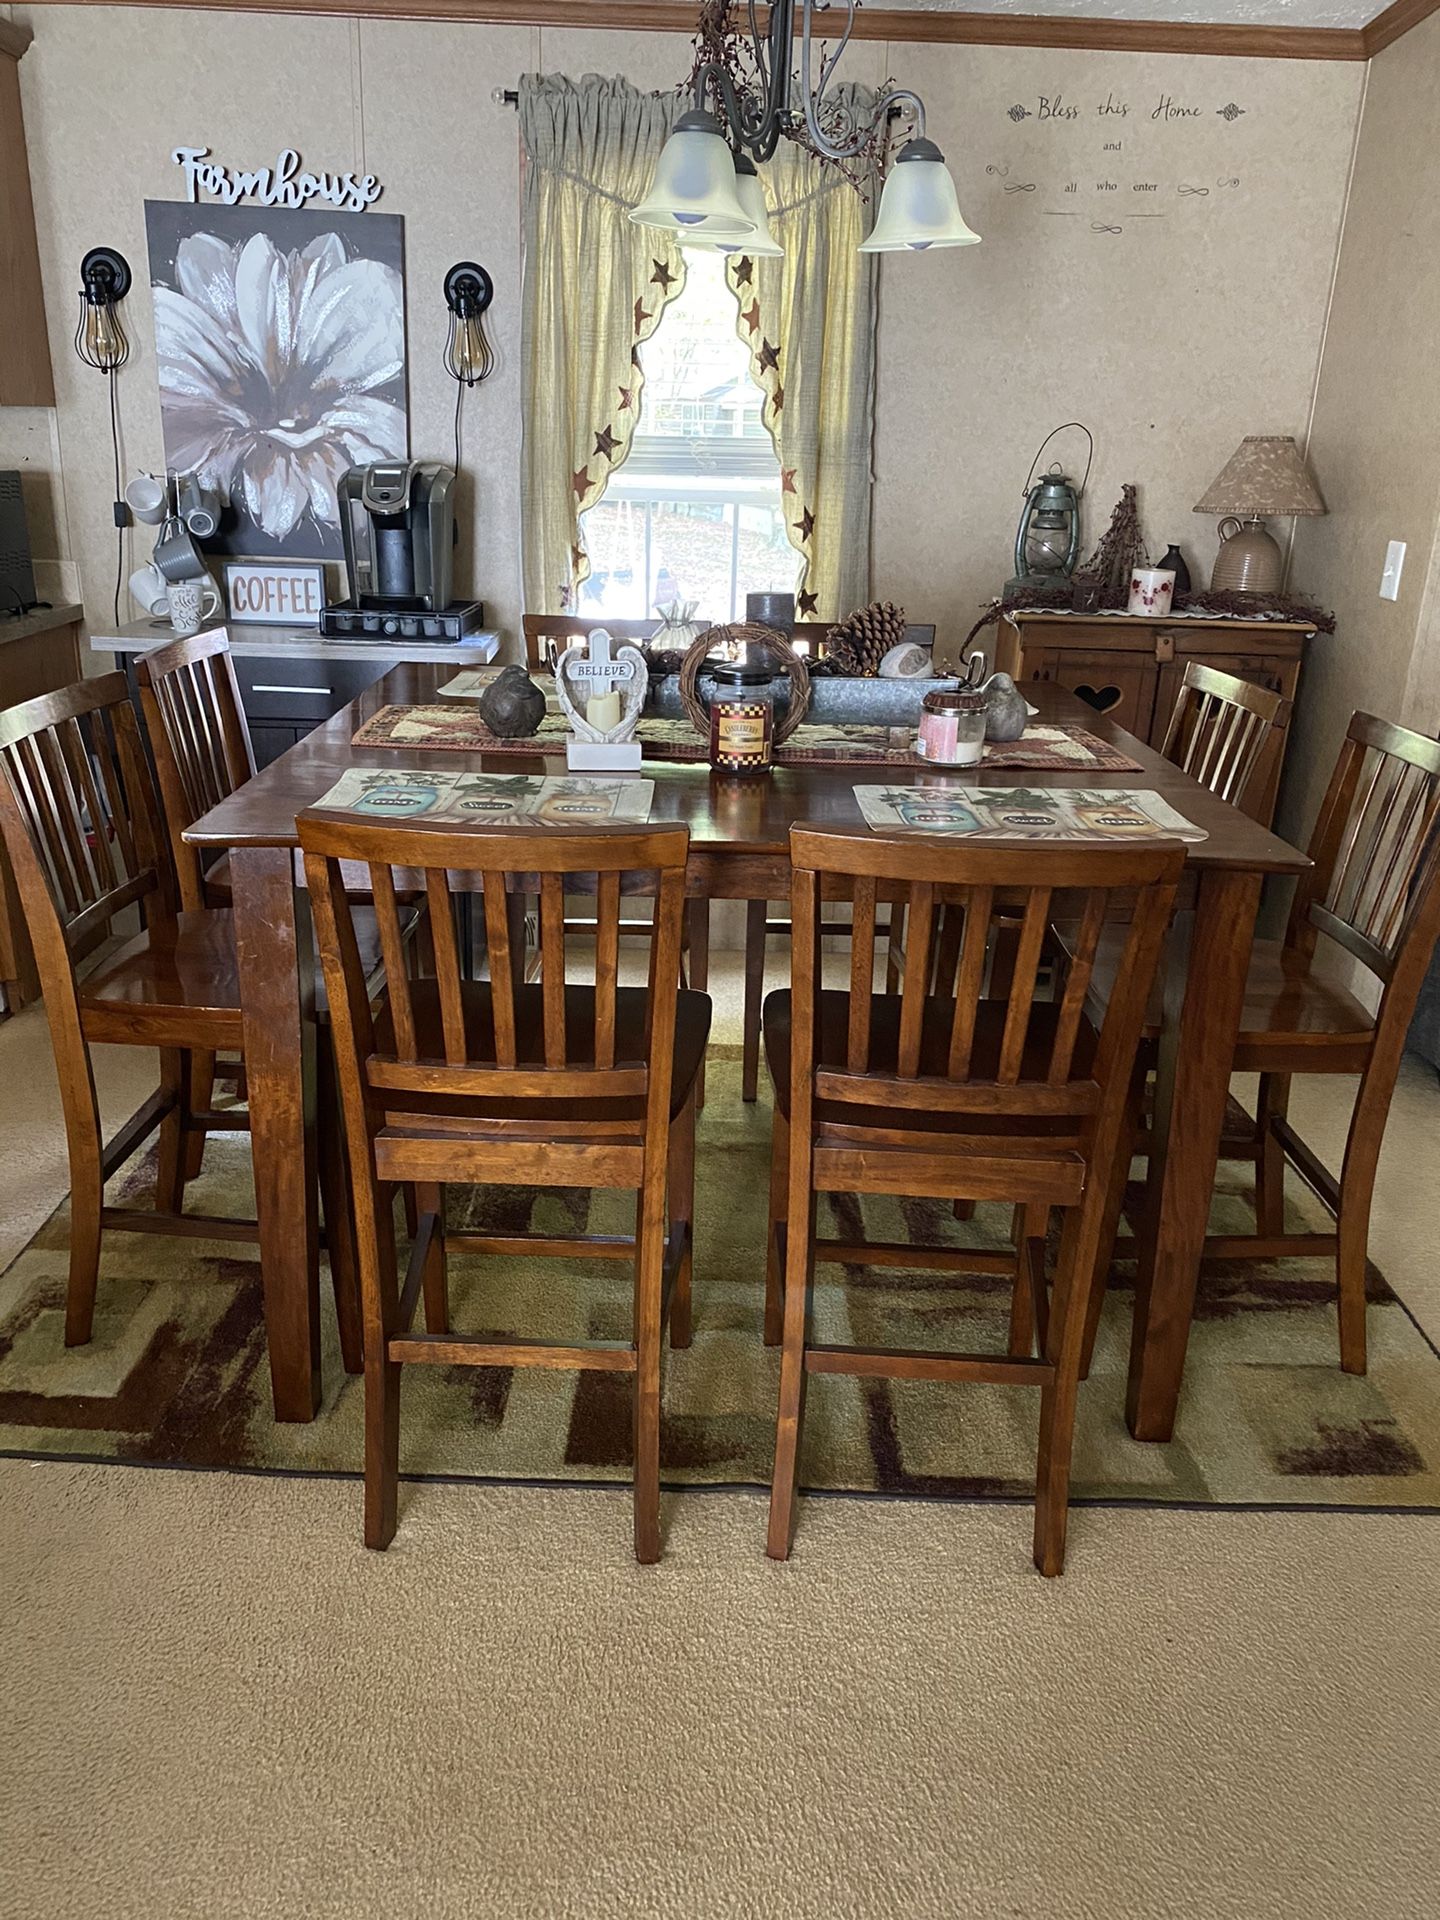 Large Square Kitchen Table , Seats 8 People ,  Very Nice And Sturdy 